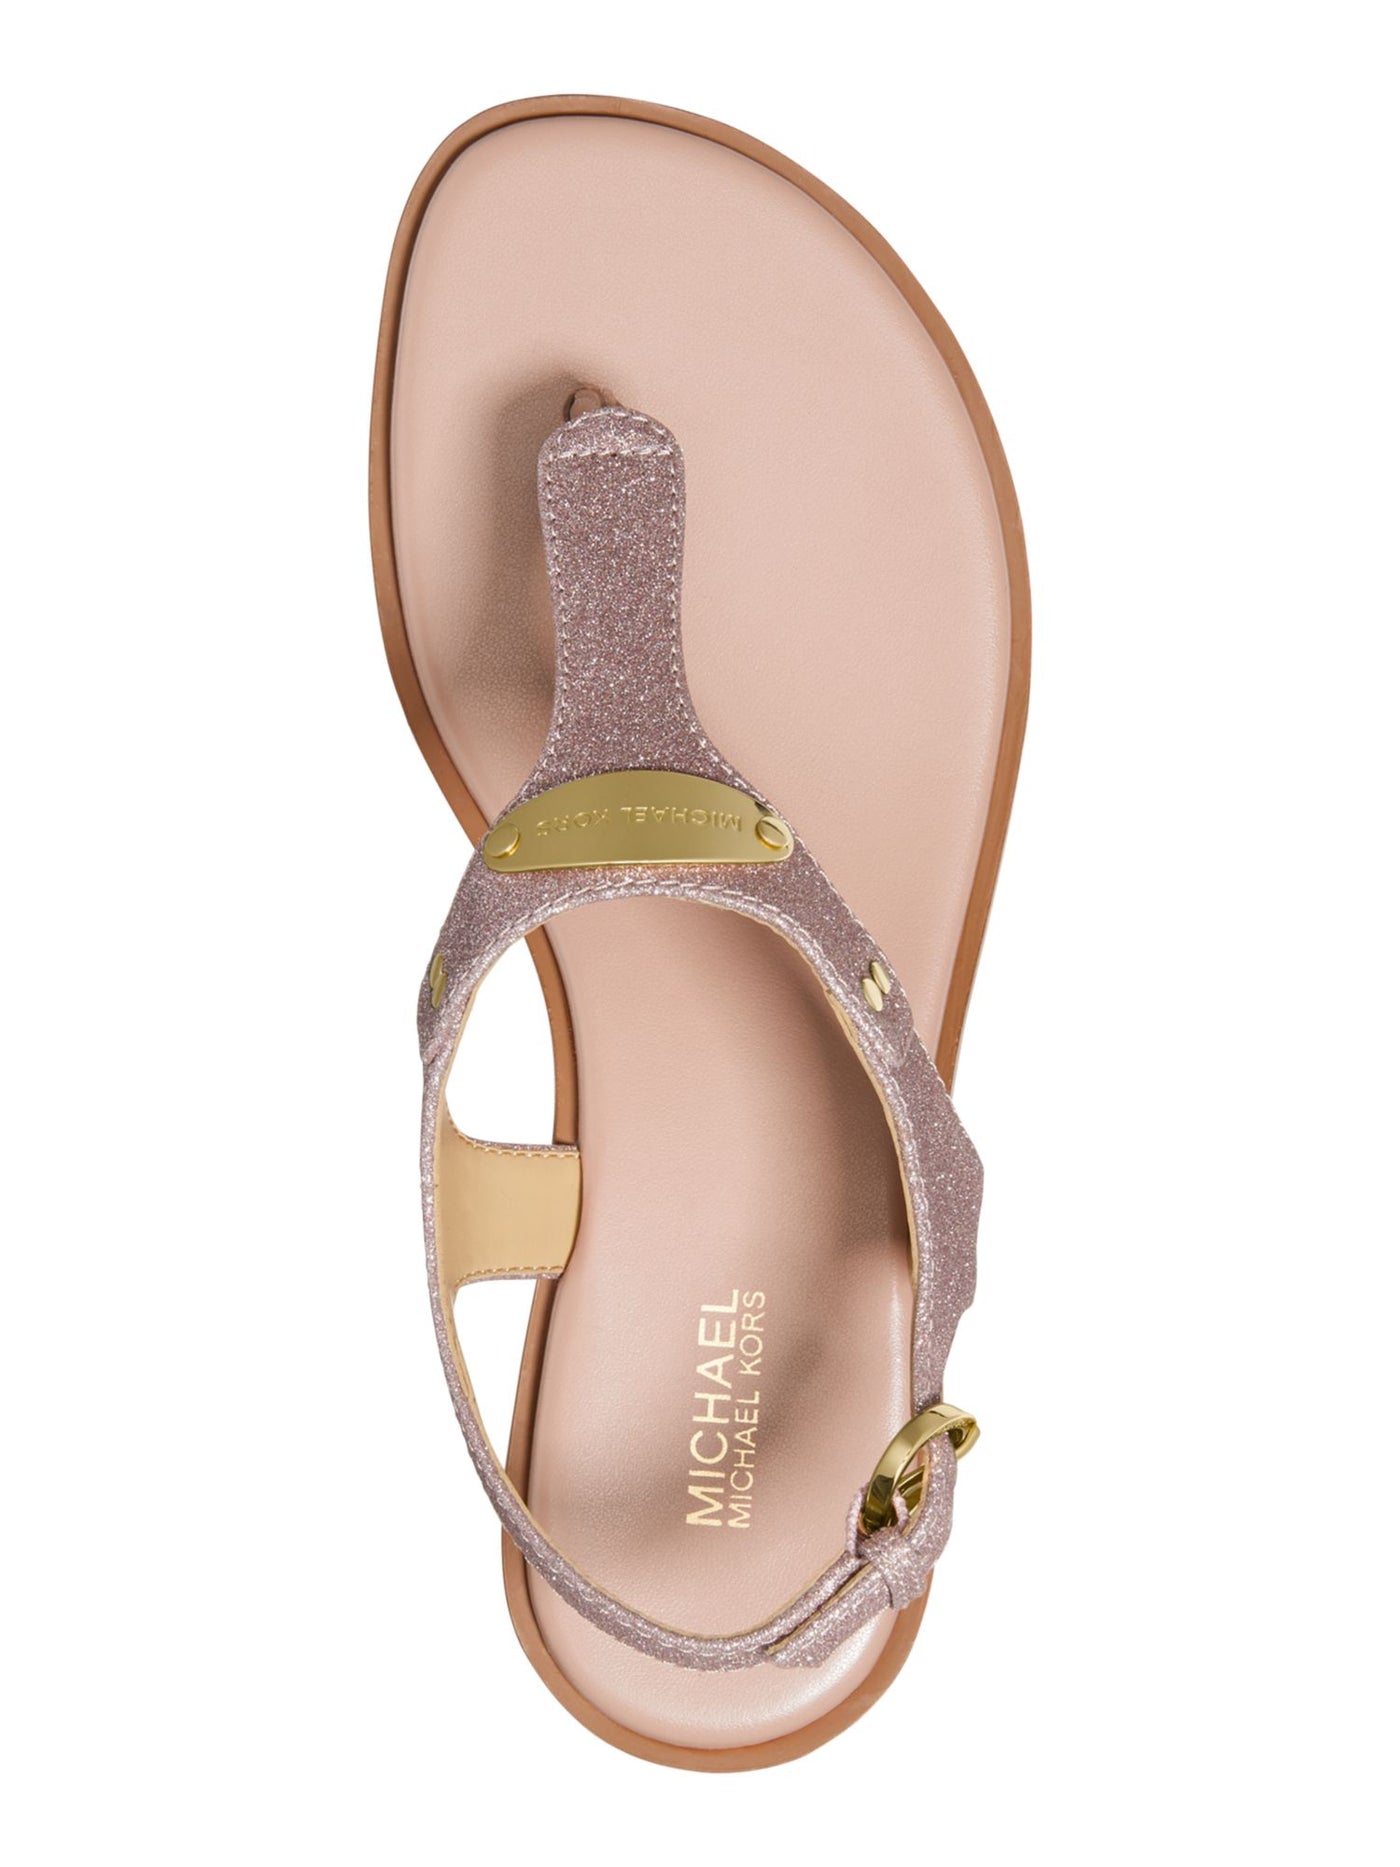 MICHAEL KORS Womens Pink Padded Glitter Logo Mk Plate Round Toe Buckle Thong Sandals Shoes 5 M